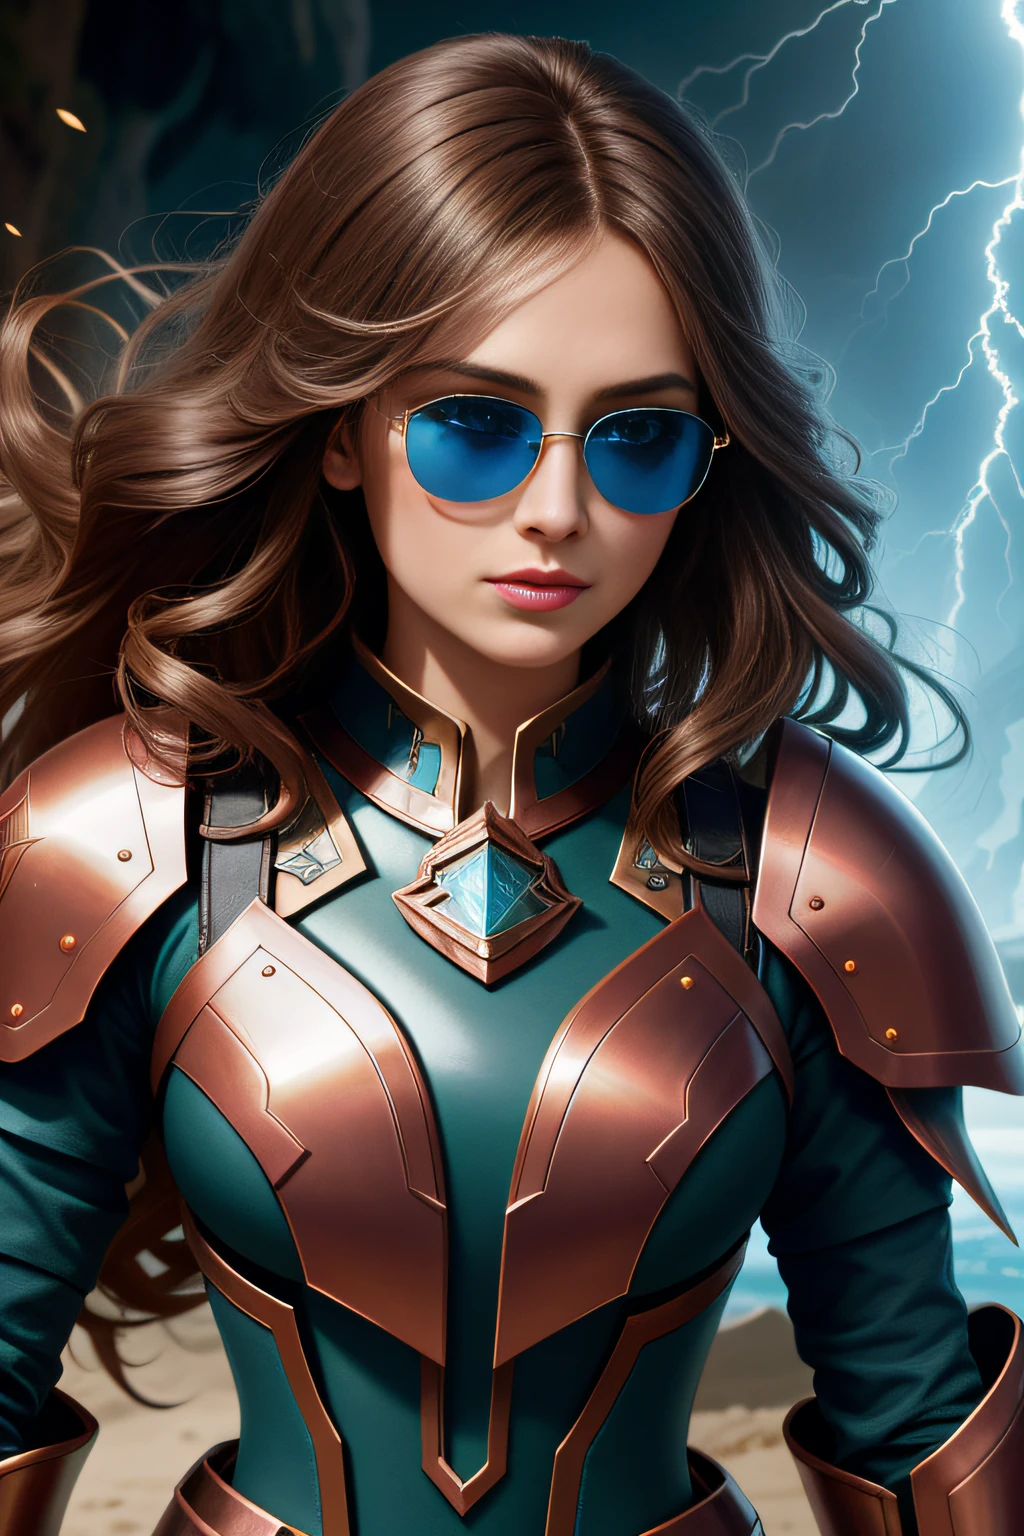 Elastic photos [Siren|sorceress woman] , Thunderball, A woman in armor wearing sunglasses,salama ,wearing edgThunderstruck_Armor, electrified, weilding thunder, Perfect face, Pretty face, Brown eyes, copper-haired, Big hair, Flat chest, lush detailing, absurderes,